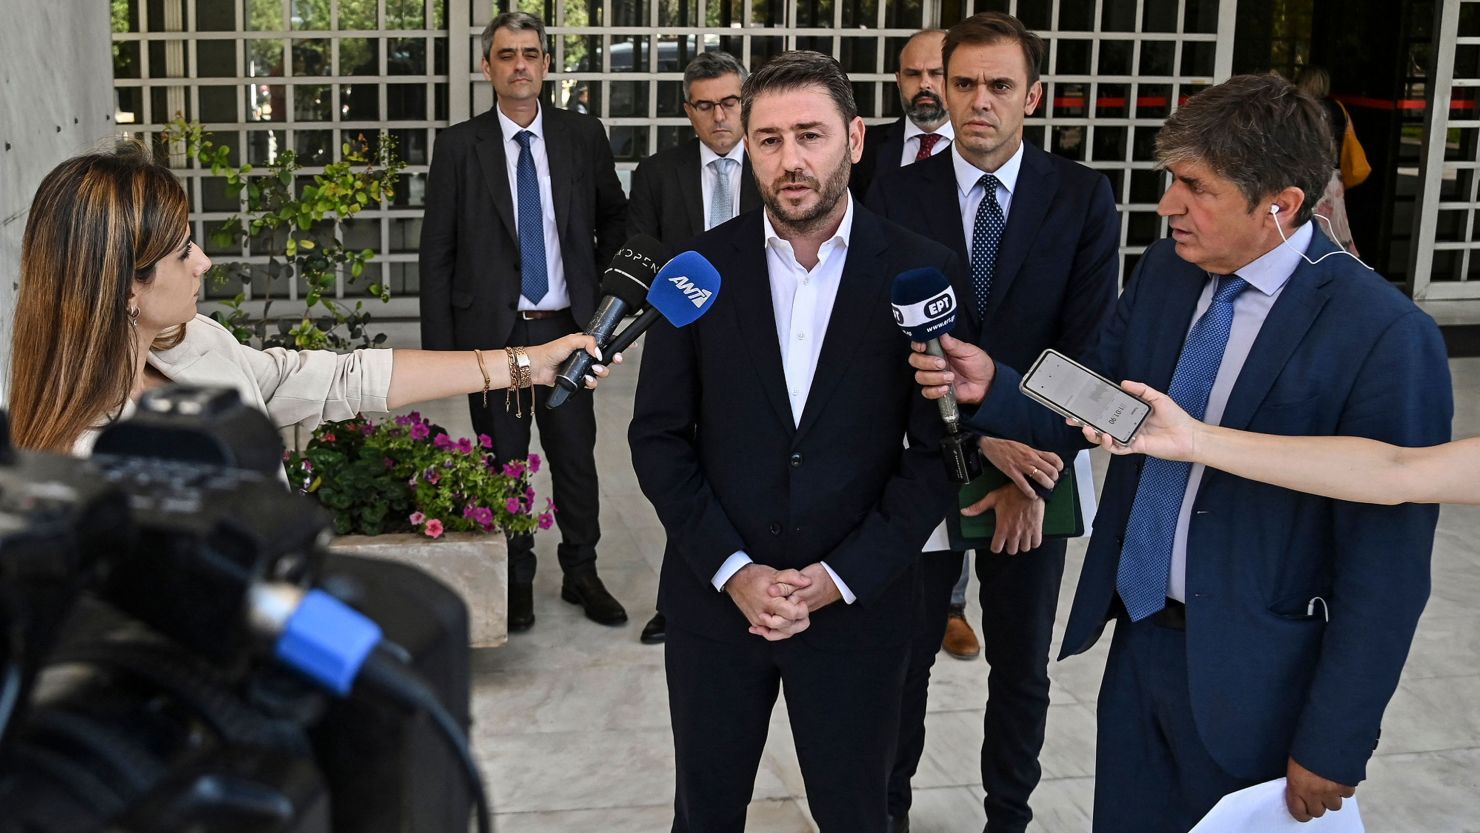 Nikos Androulakis, a member of European Parliament and president of the Movement for Change (Pasok-Kinal) party, filed a complaint at the Supreme Court in Athens over attempted spying on his mobile phone with Predator malware. 